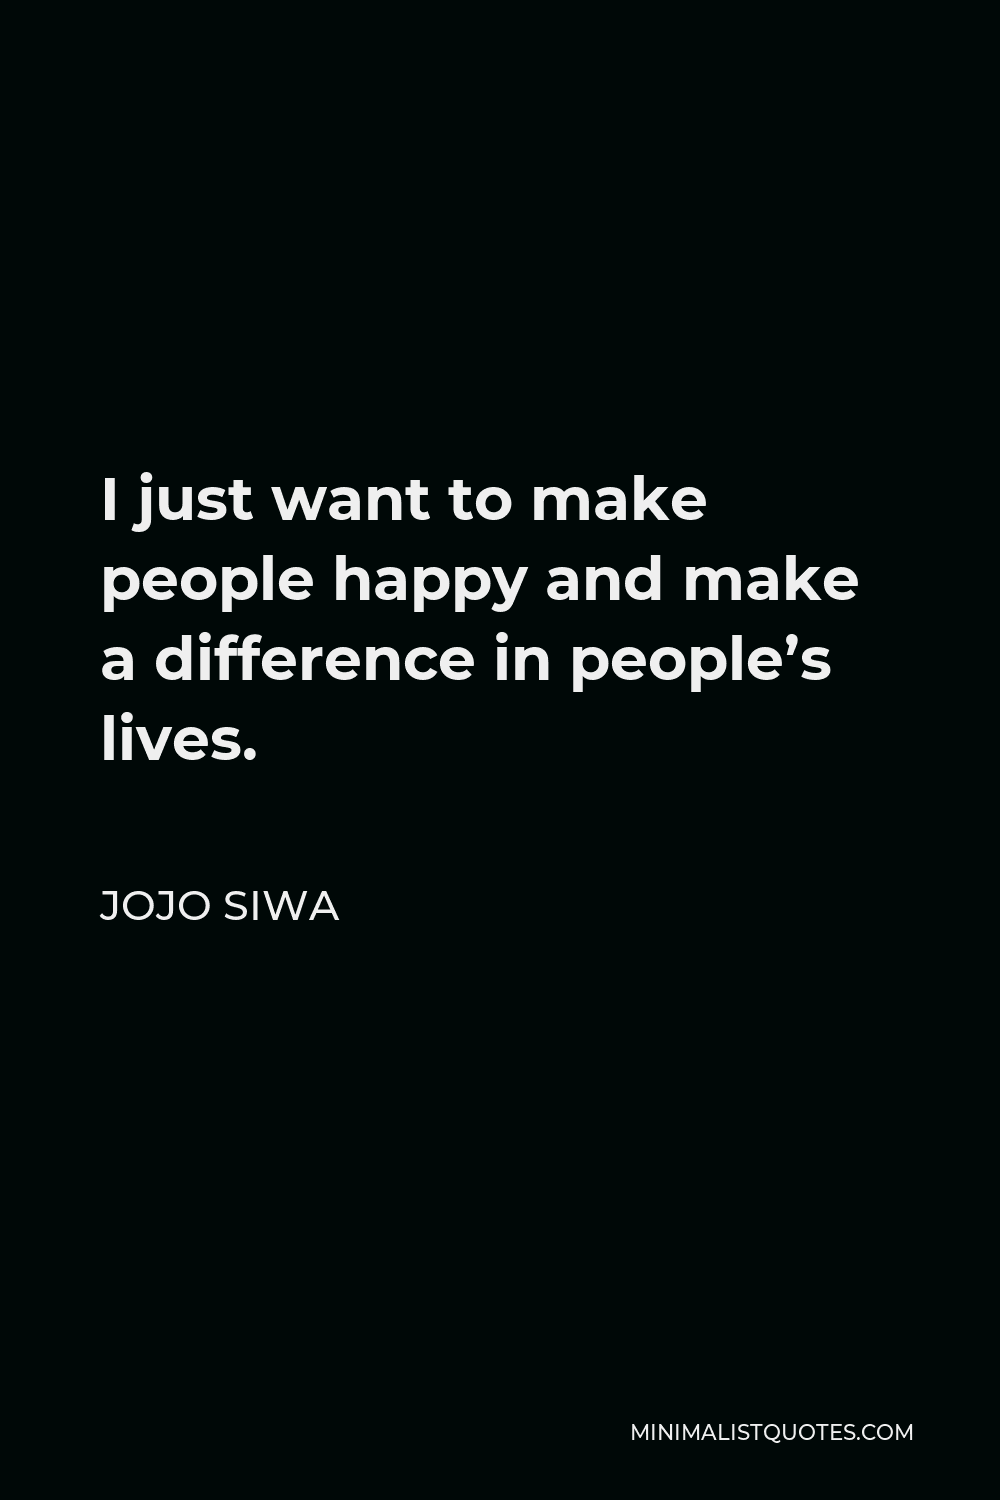 JoJo Siwa Quote - I just want to make people happy and make a difference in people’s lives.